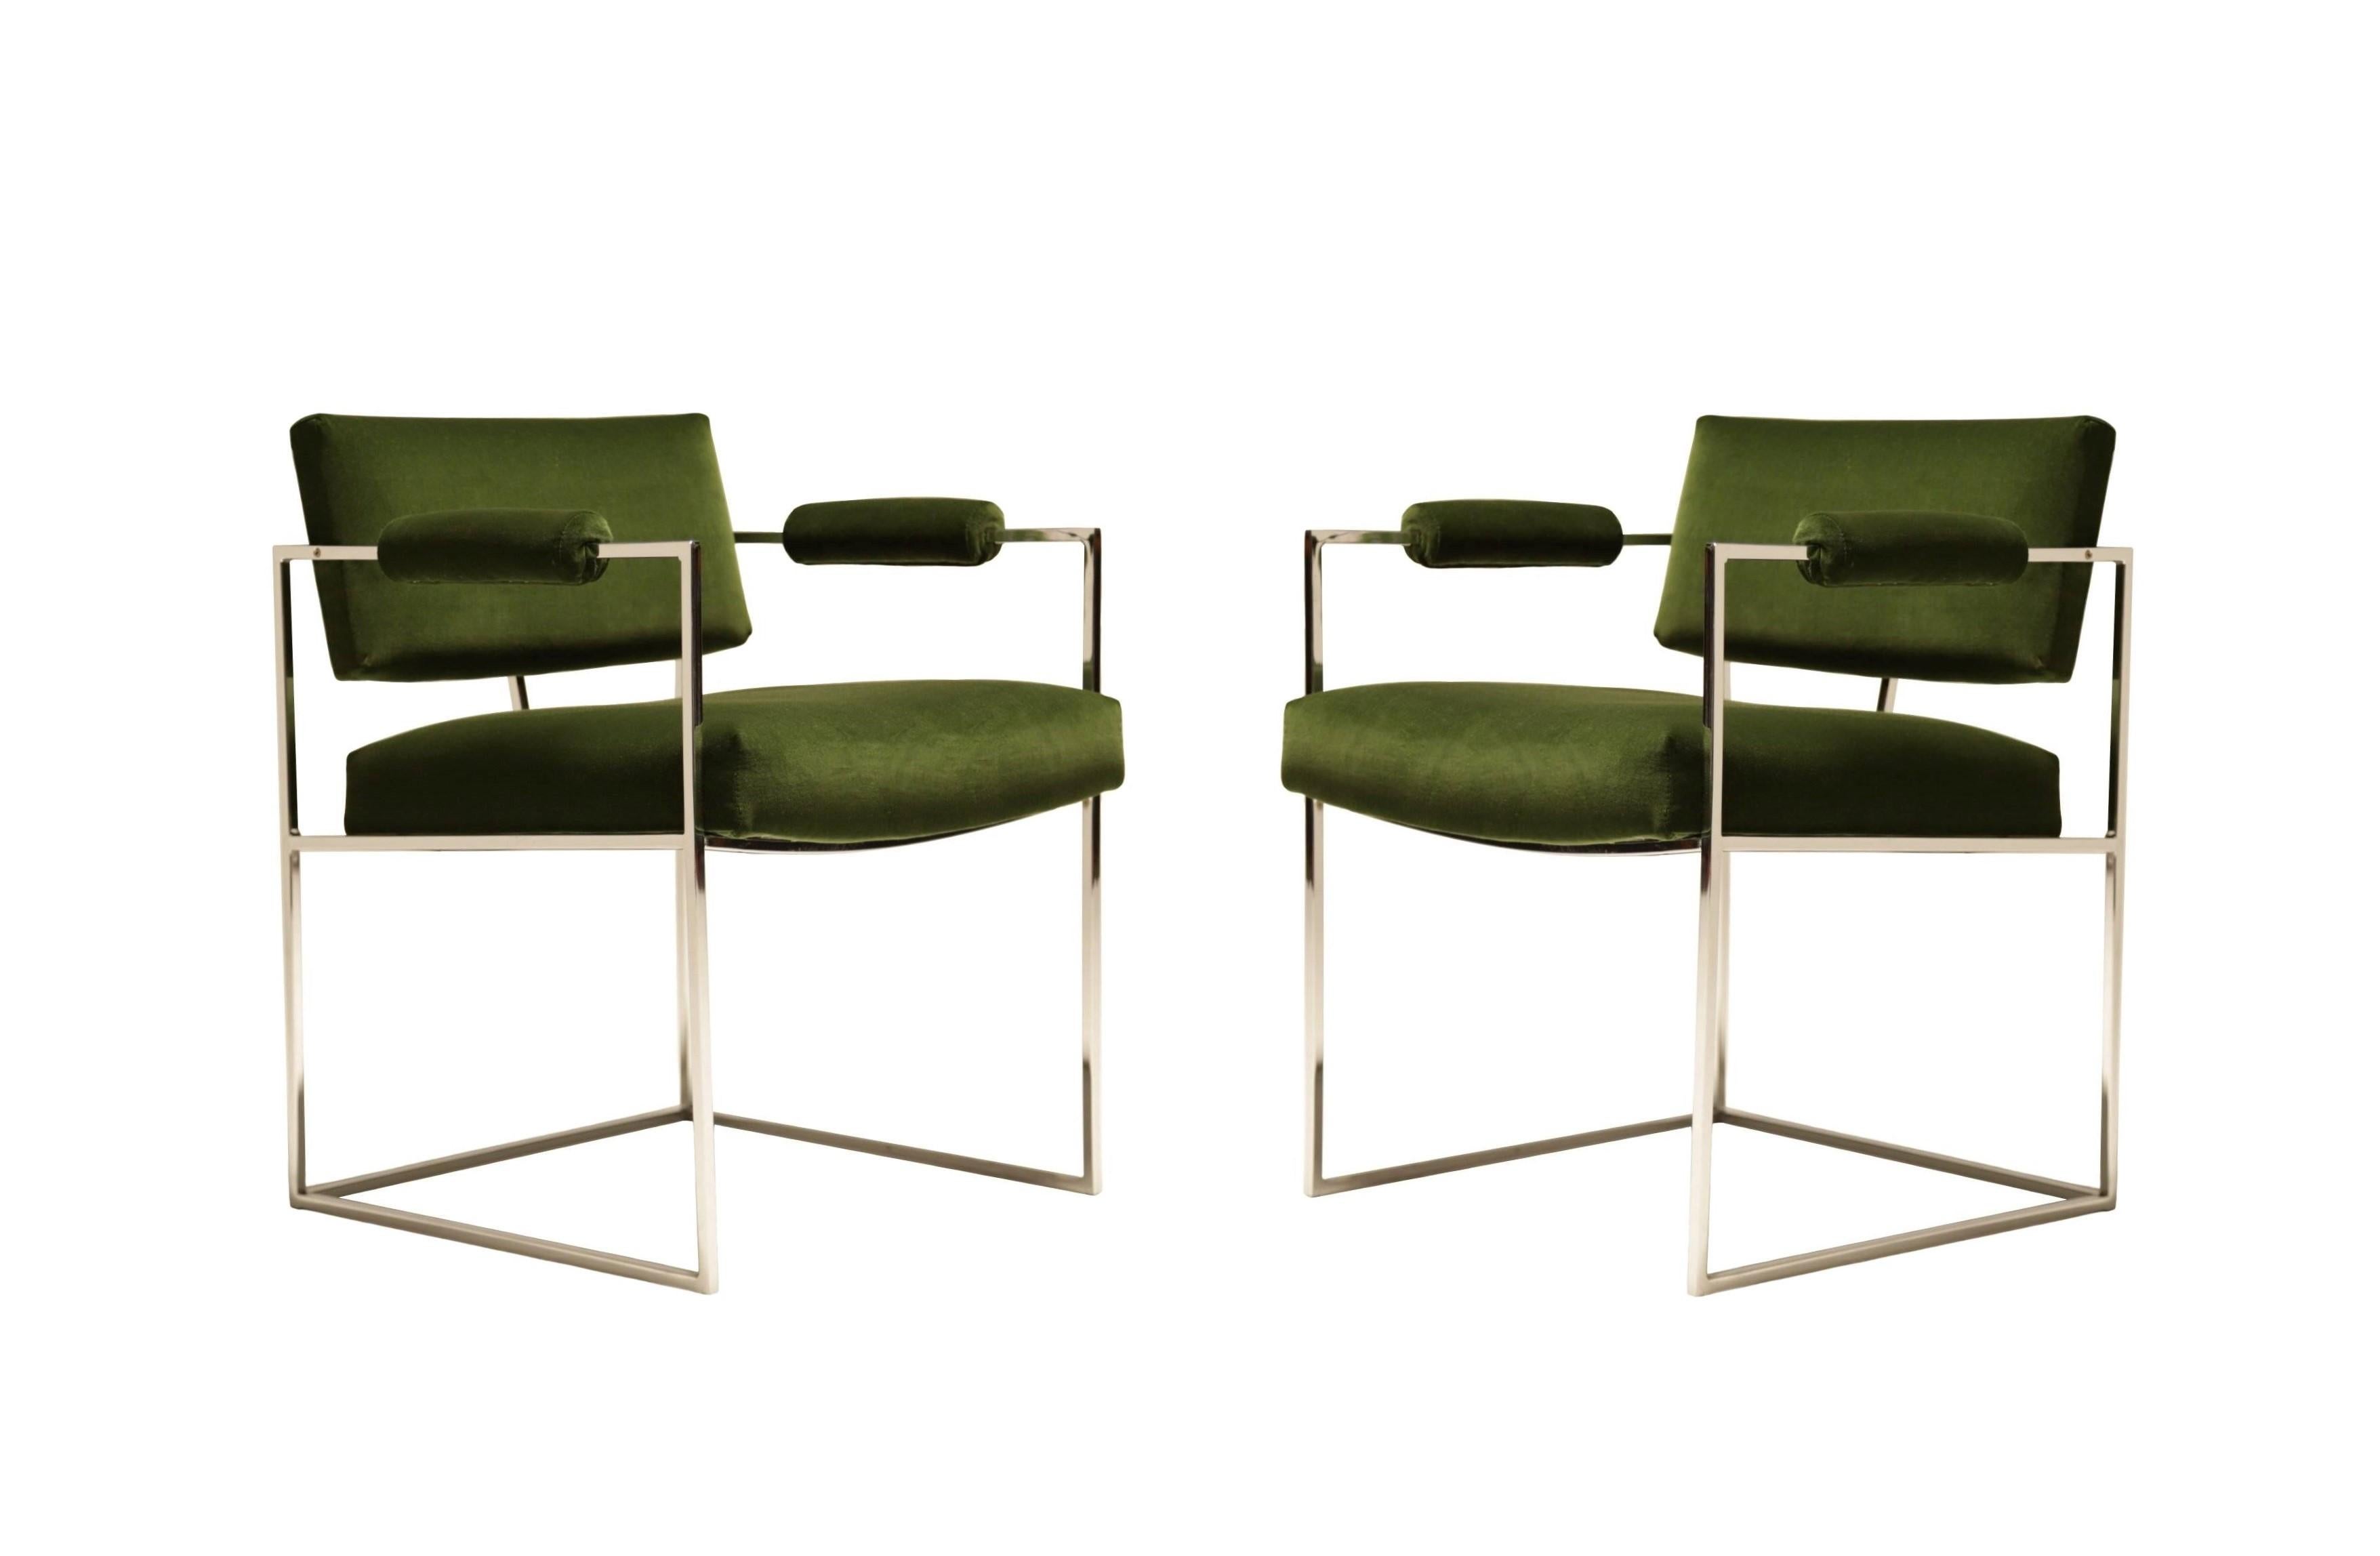 Awesome pair of vintage chrome “Thin Line” dining chairs designed by Milo Baughman for Thayer Coggin, circa 1970s. The 1188 chair by Milo Baughman is touted as being his favorite chairs. He even chose it to use in the home of his business partner